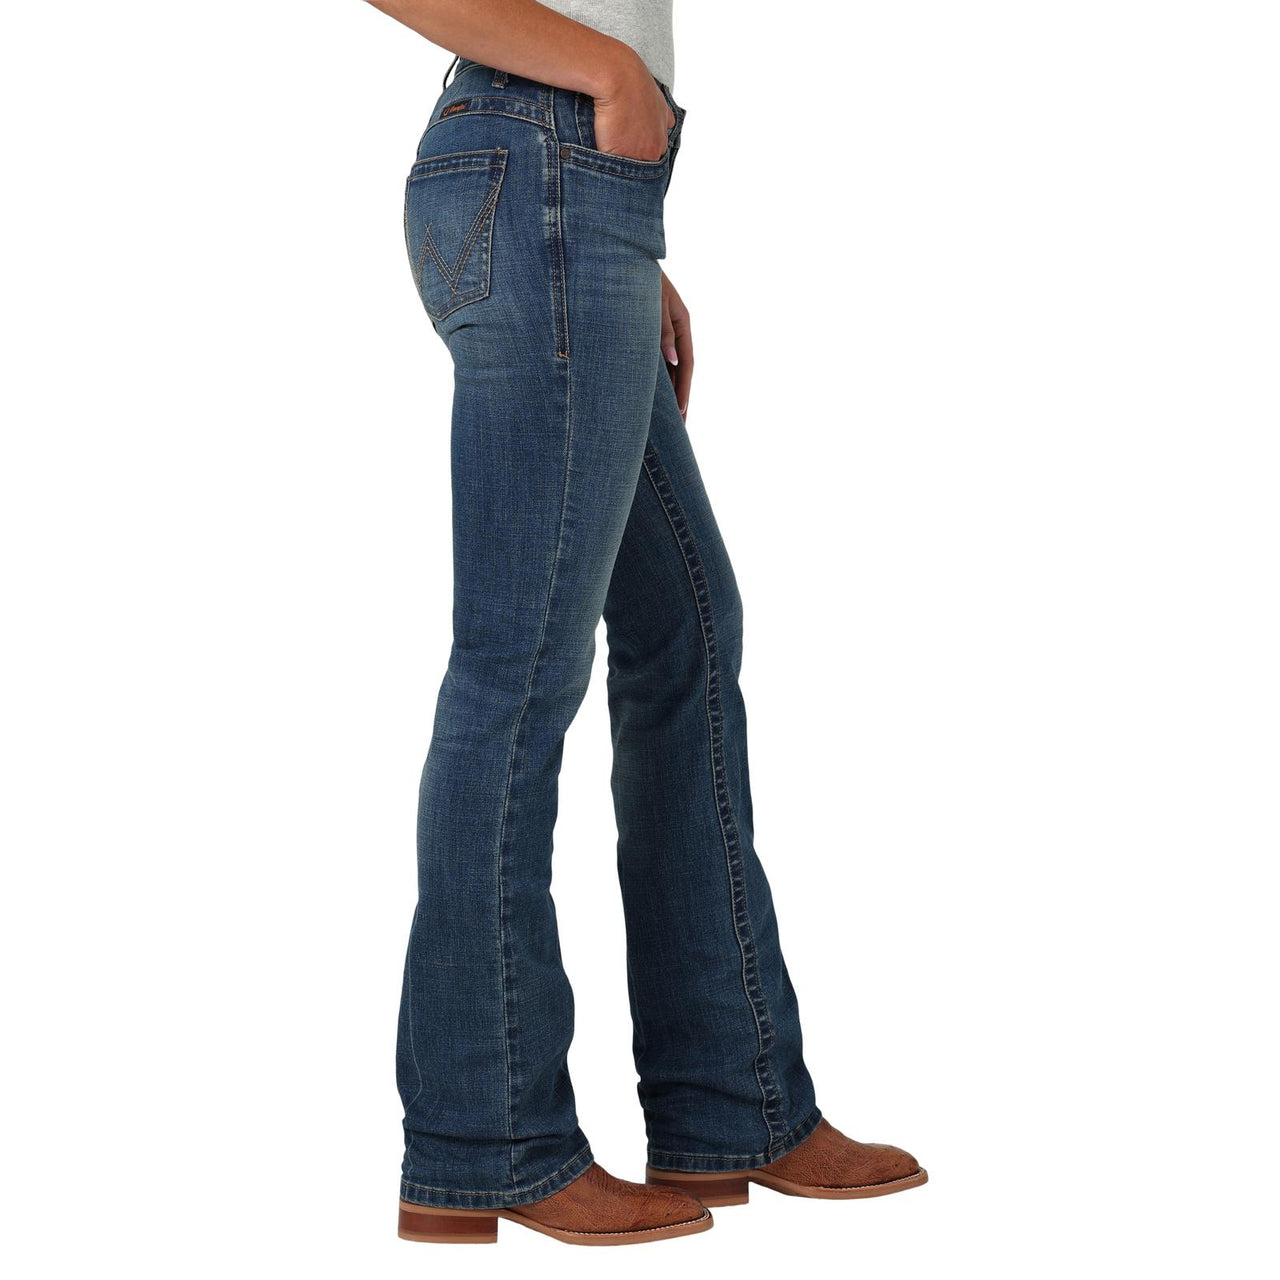 Wrangler Women's Ultimate Riding Jean Willow Bootcut Jeans - Marie